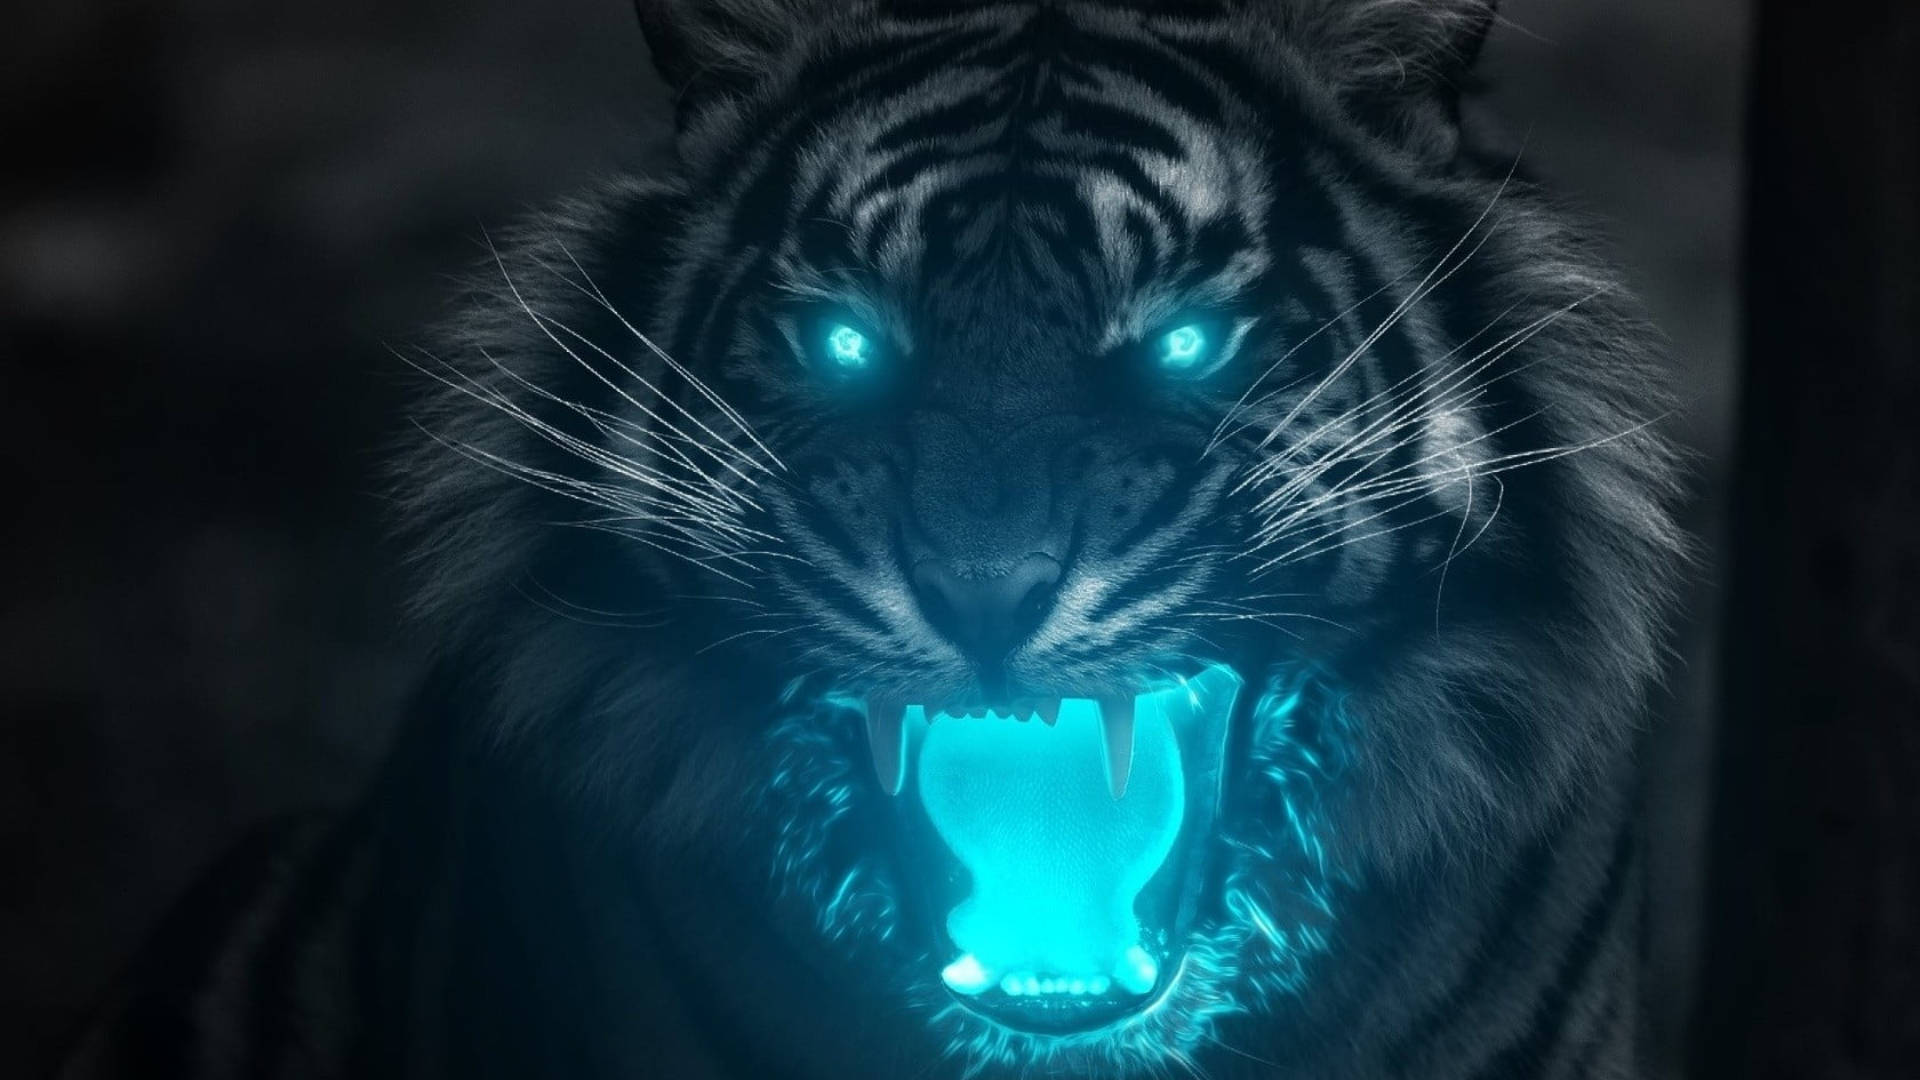 Free Cool Tiger Wallpaper Downloads, [100+] Cool Tiger Wallpapers for FREE  